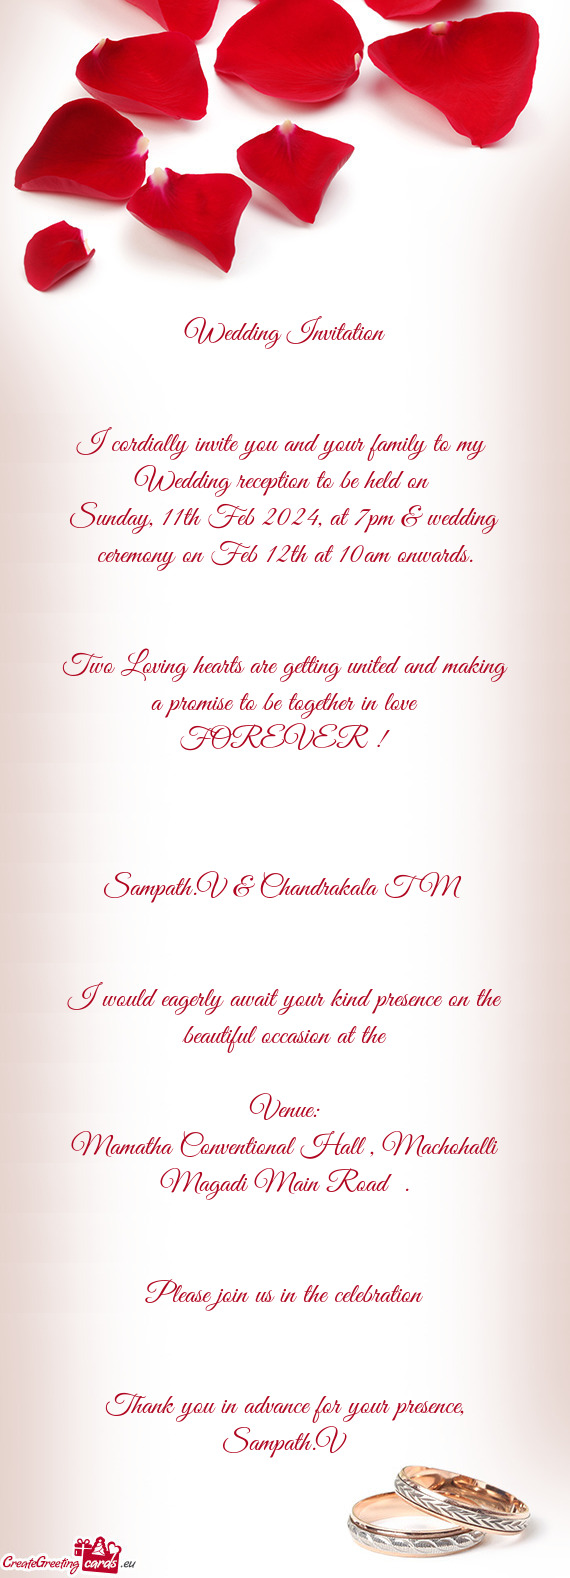 Wedding Invitation  I cordially invite you and your family to my Wedding reception to be held o